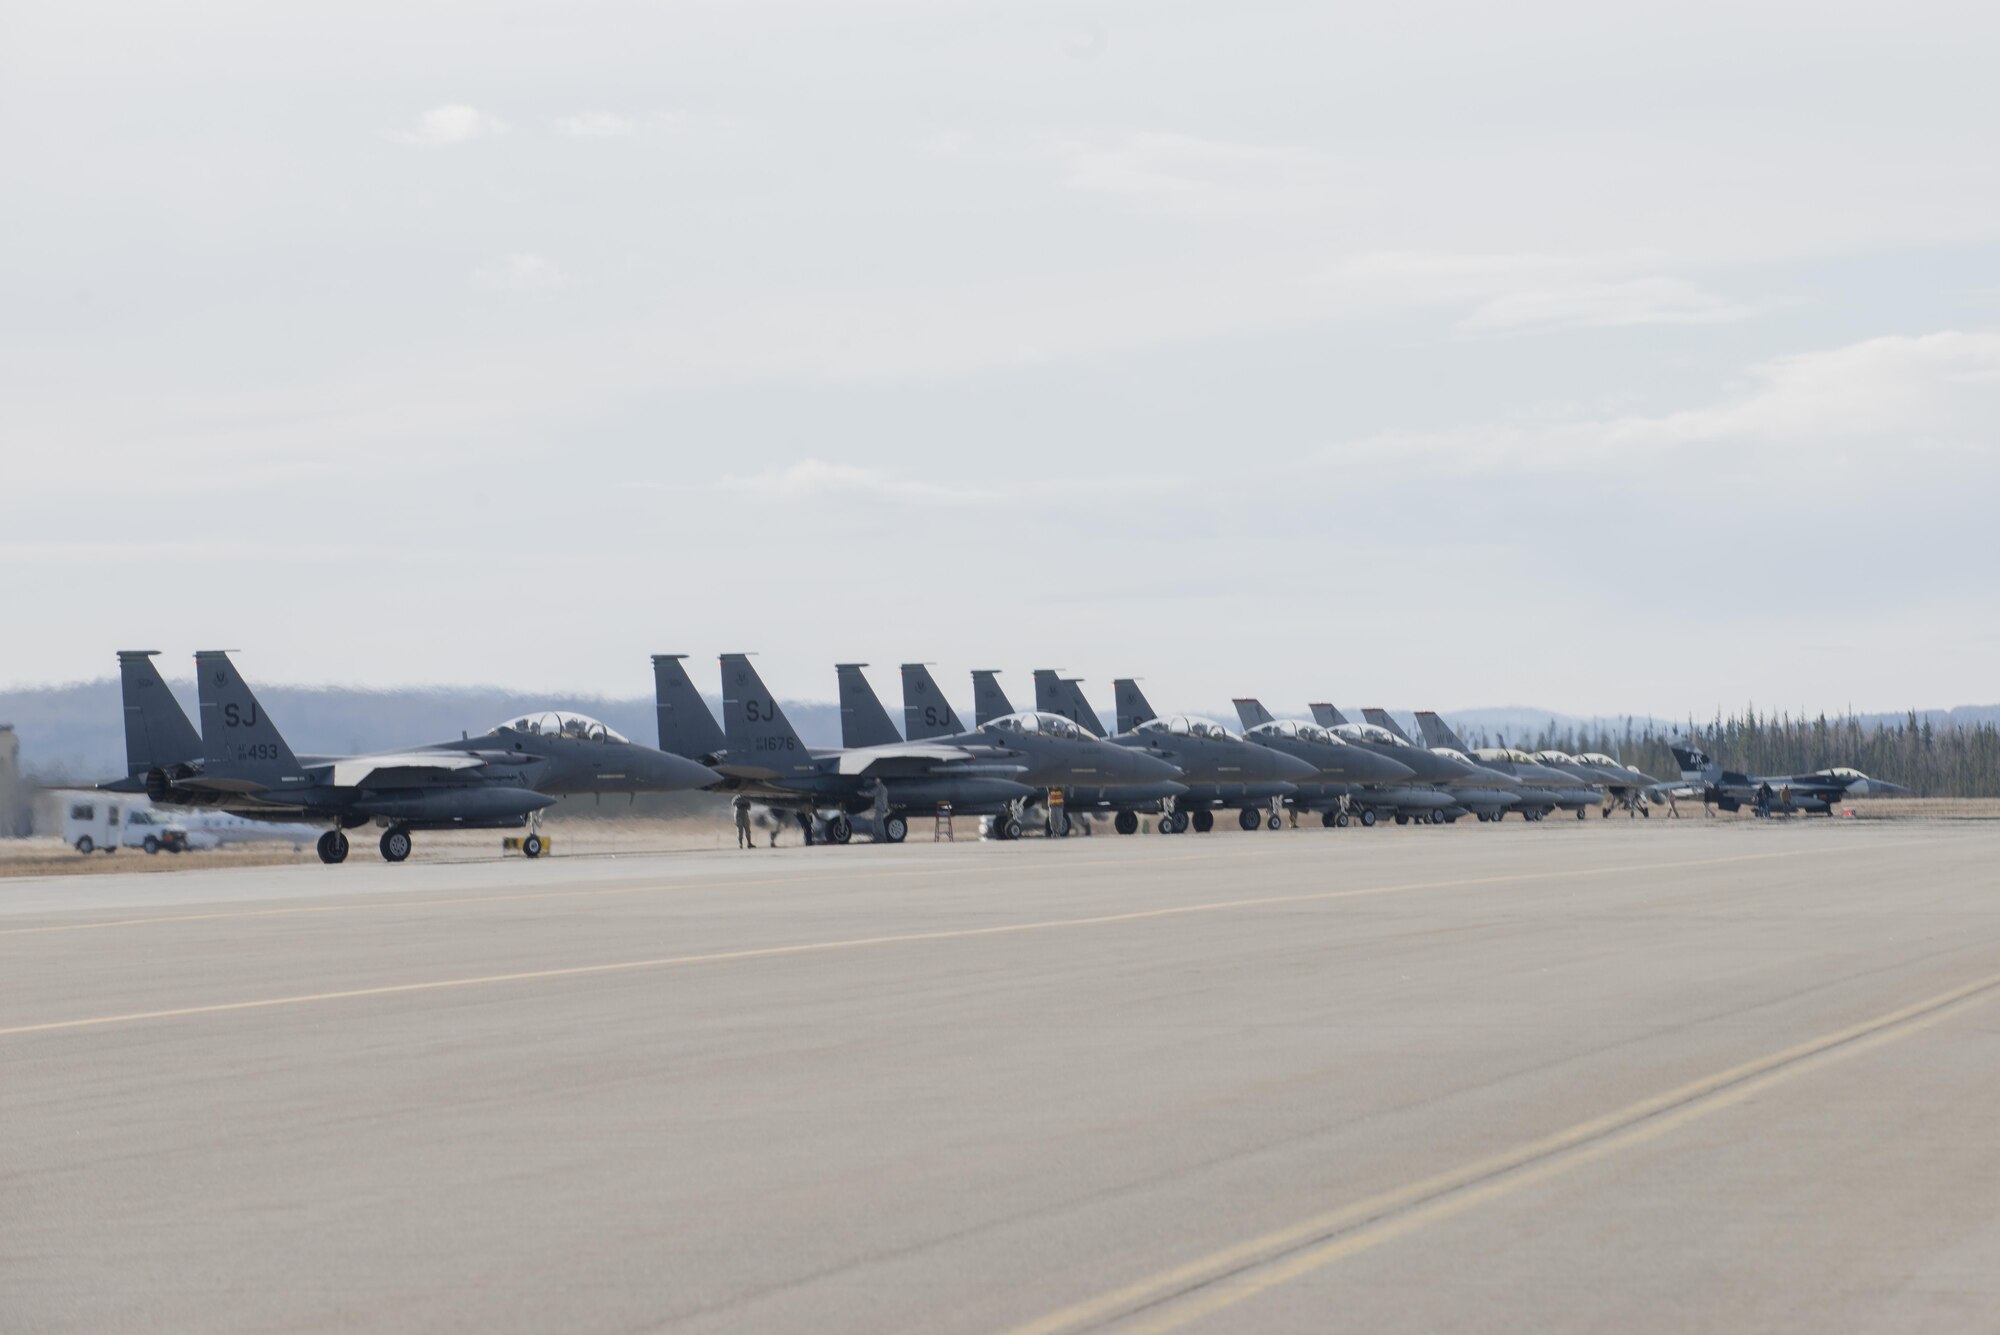 EIELSON AIR FORCE BASE, Alaska – U.S. Air Force aircraft assigned to the 335th Fighter Squadron, Seymour Johnson Air Force Base, N.C., the 13th Fighter Squadron, Misawa Air Base, Japan, and the 18th Aggressor Squadron, prepare for a sortie during NORTHERN EDGE 2017 (NE17) May 1, 2017, at Eielson Air Force Base, Alaska. NE17 is Alaska’s premier joint training exercise designed to practice operations, techniques and procedures as well as enhance interoperability among the services. Thousands of participants from all the services, Airmen, Soldiers, Sailors, Marines and Coast Guardsmen from active duty, Reserve and National Guard units are involved. (U.S. Air Force photo/Staff Sgt. Ashley Nicole Taylor)